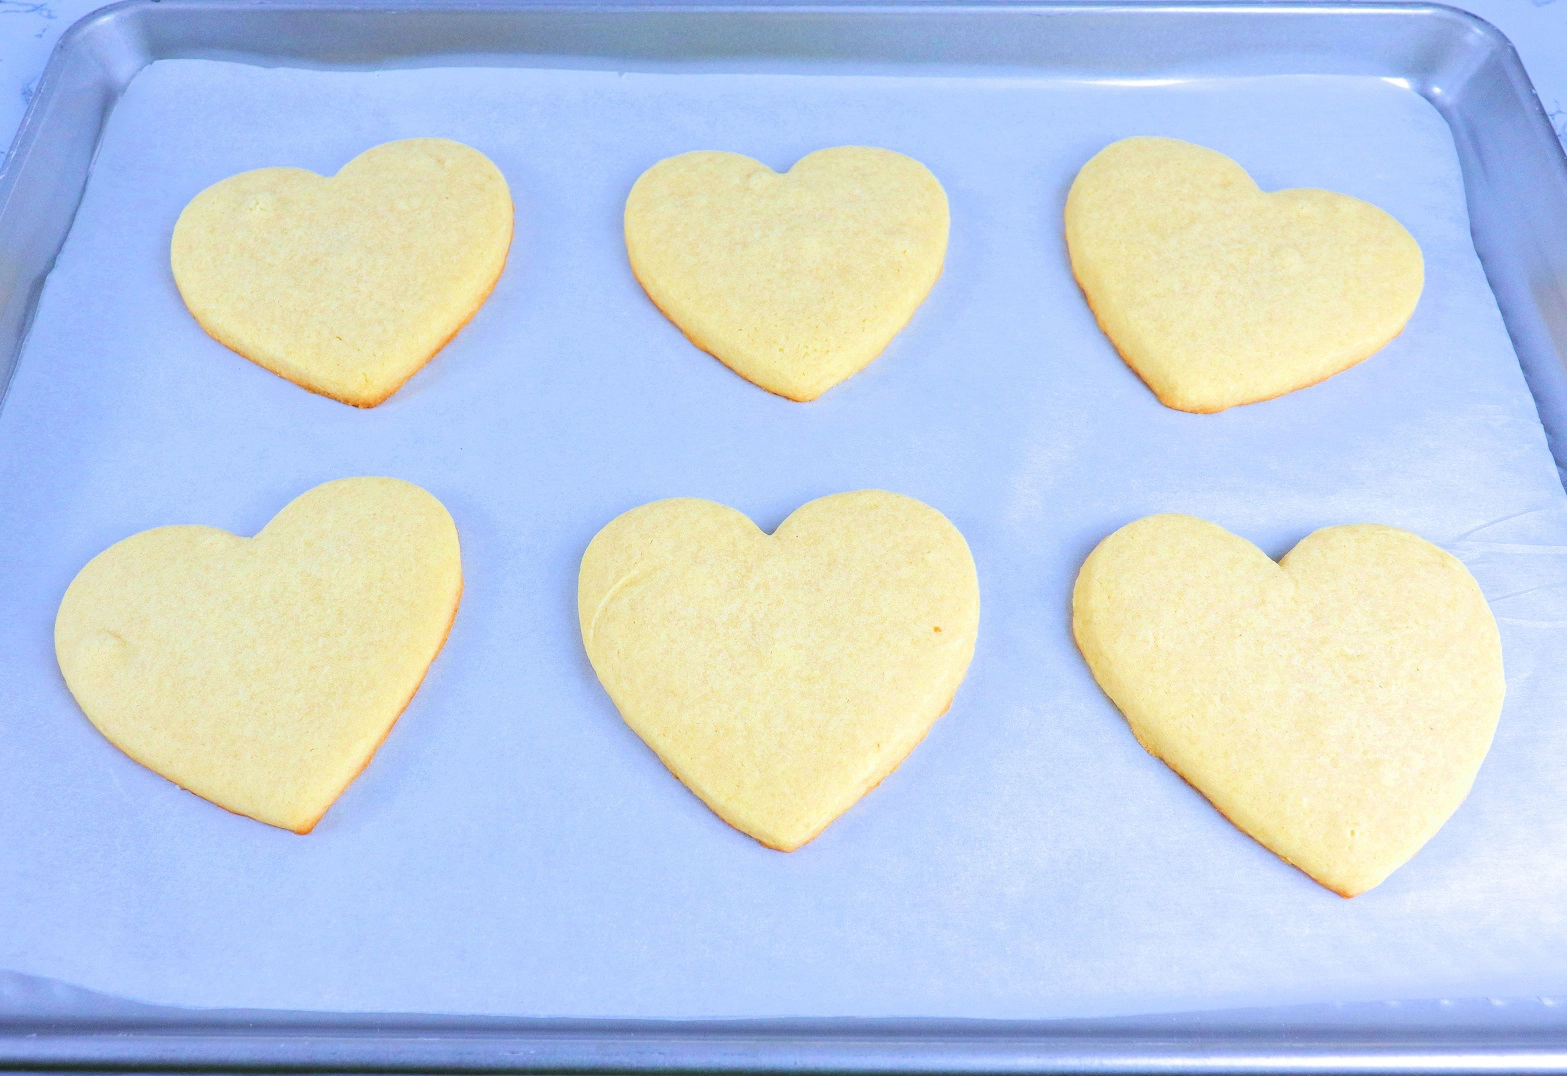 Baked Heart-Shaped Cookies